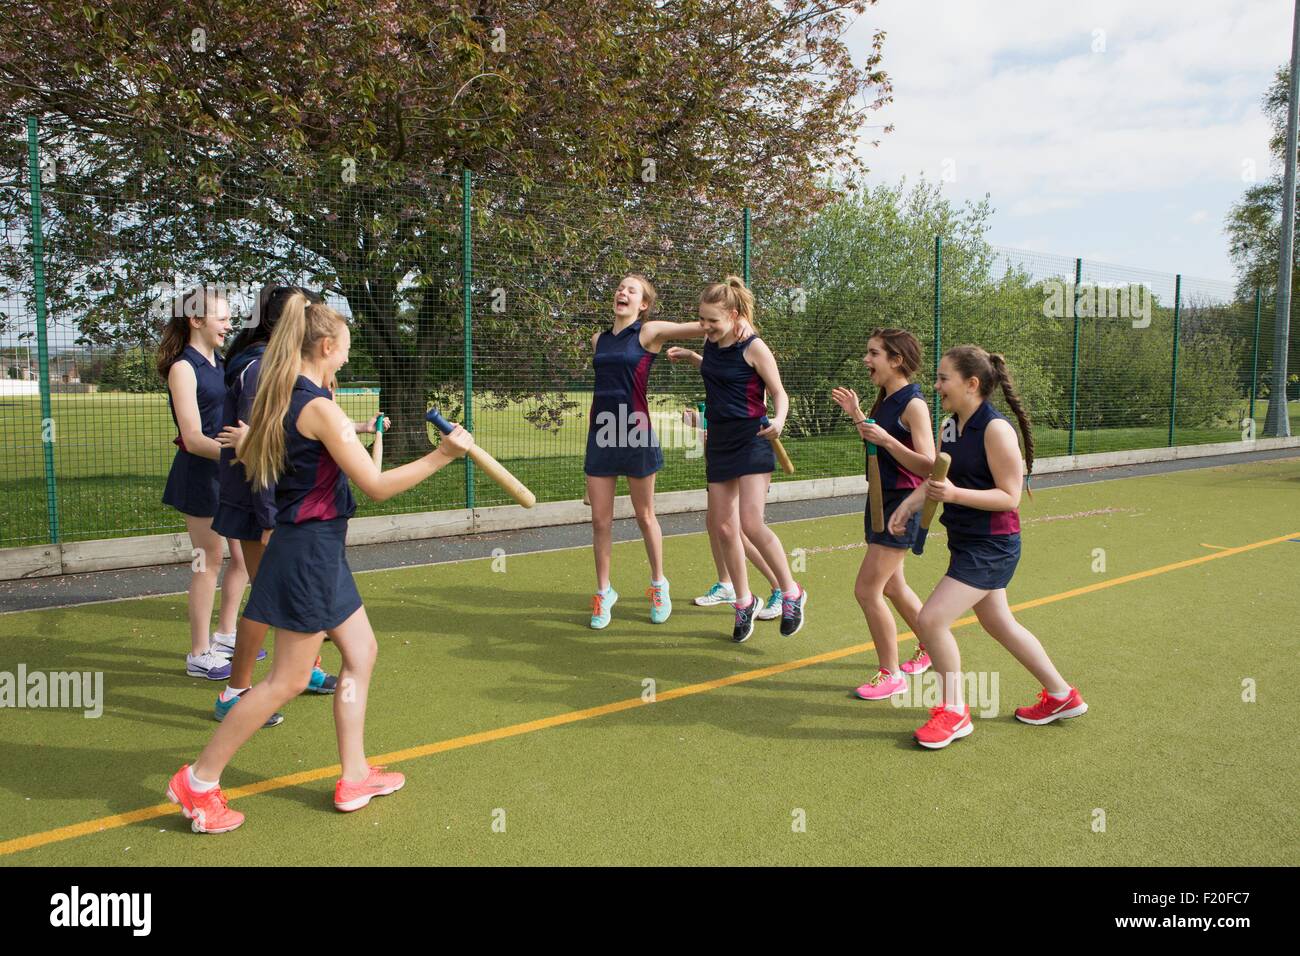 Group of girls on sports field with rounders bats Stock Photo